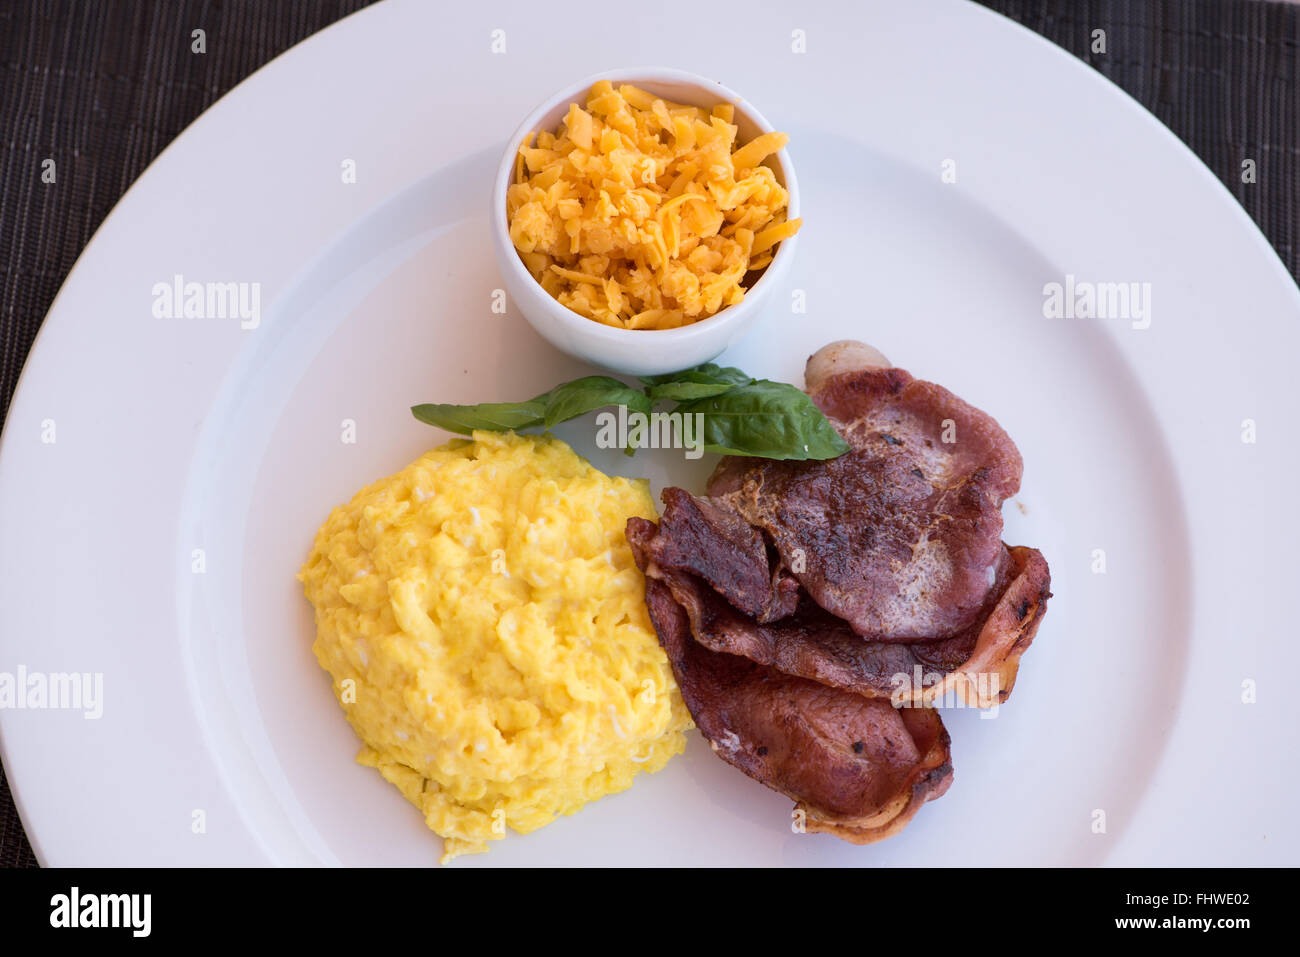 Overhead view of scrambled eggs, bacon and grated cheese breakfast Stock Photo